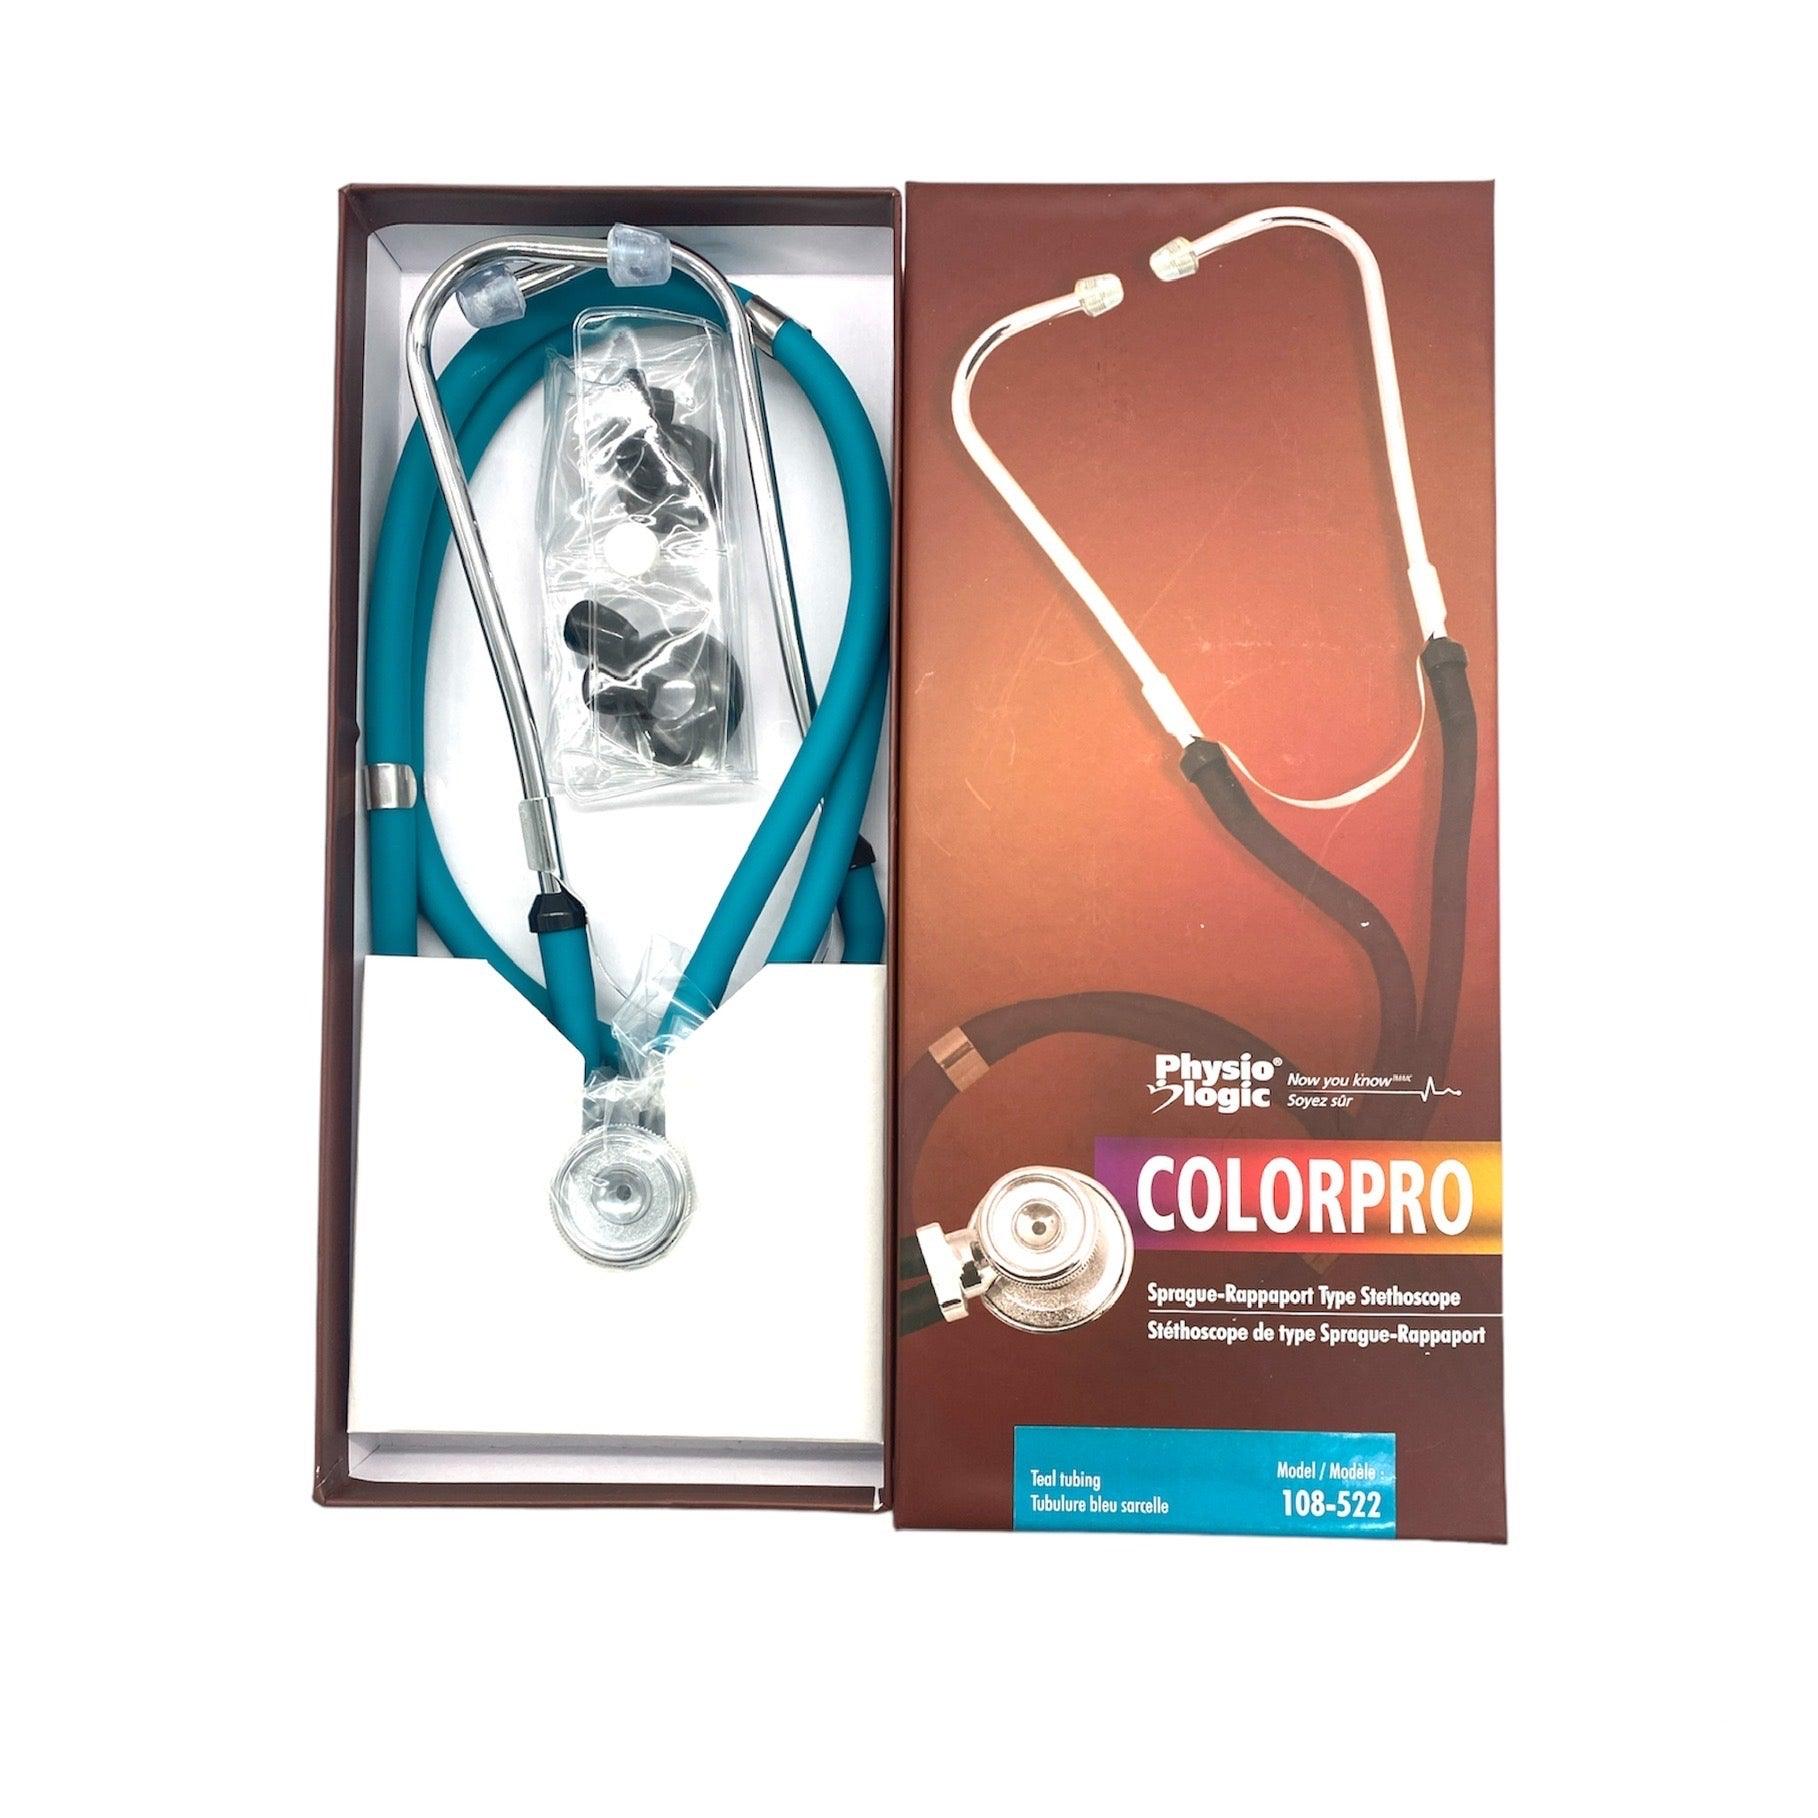 Color Pro Sprague-Rappaport Type Stethoscope